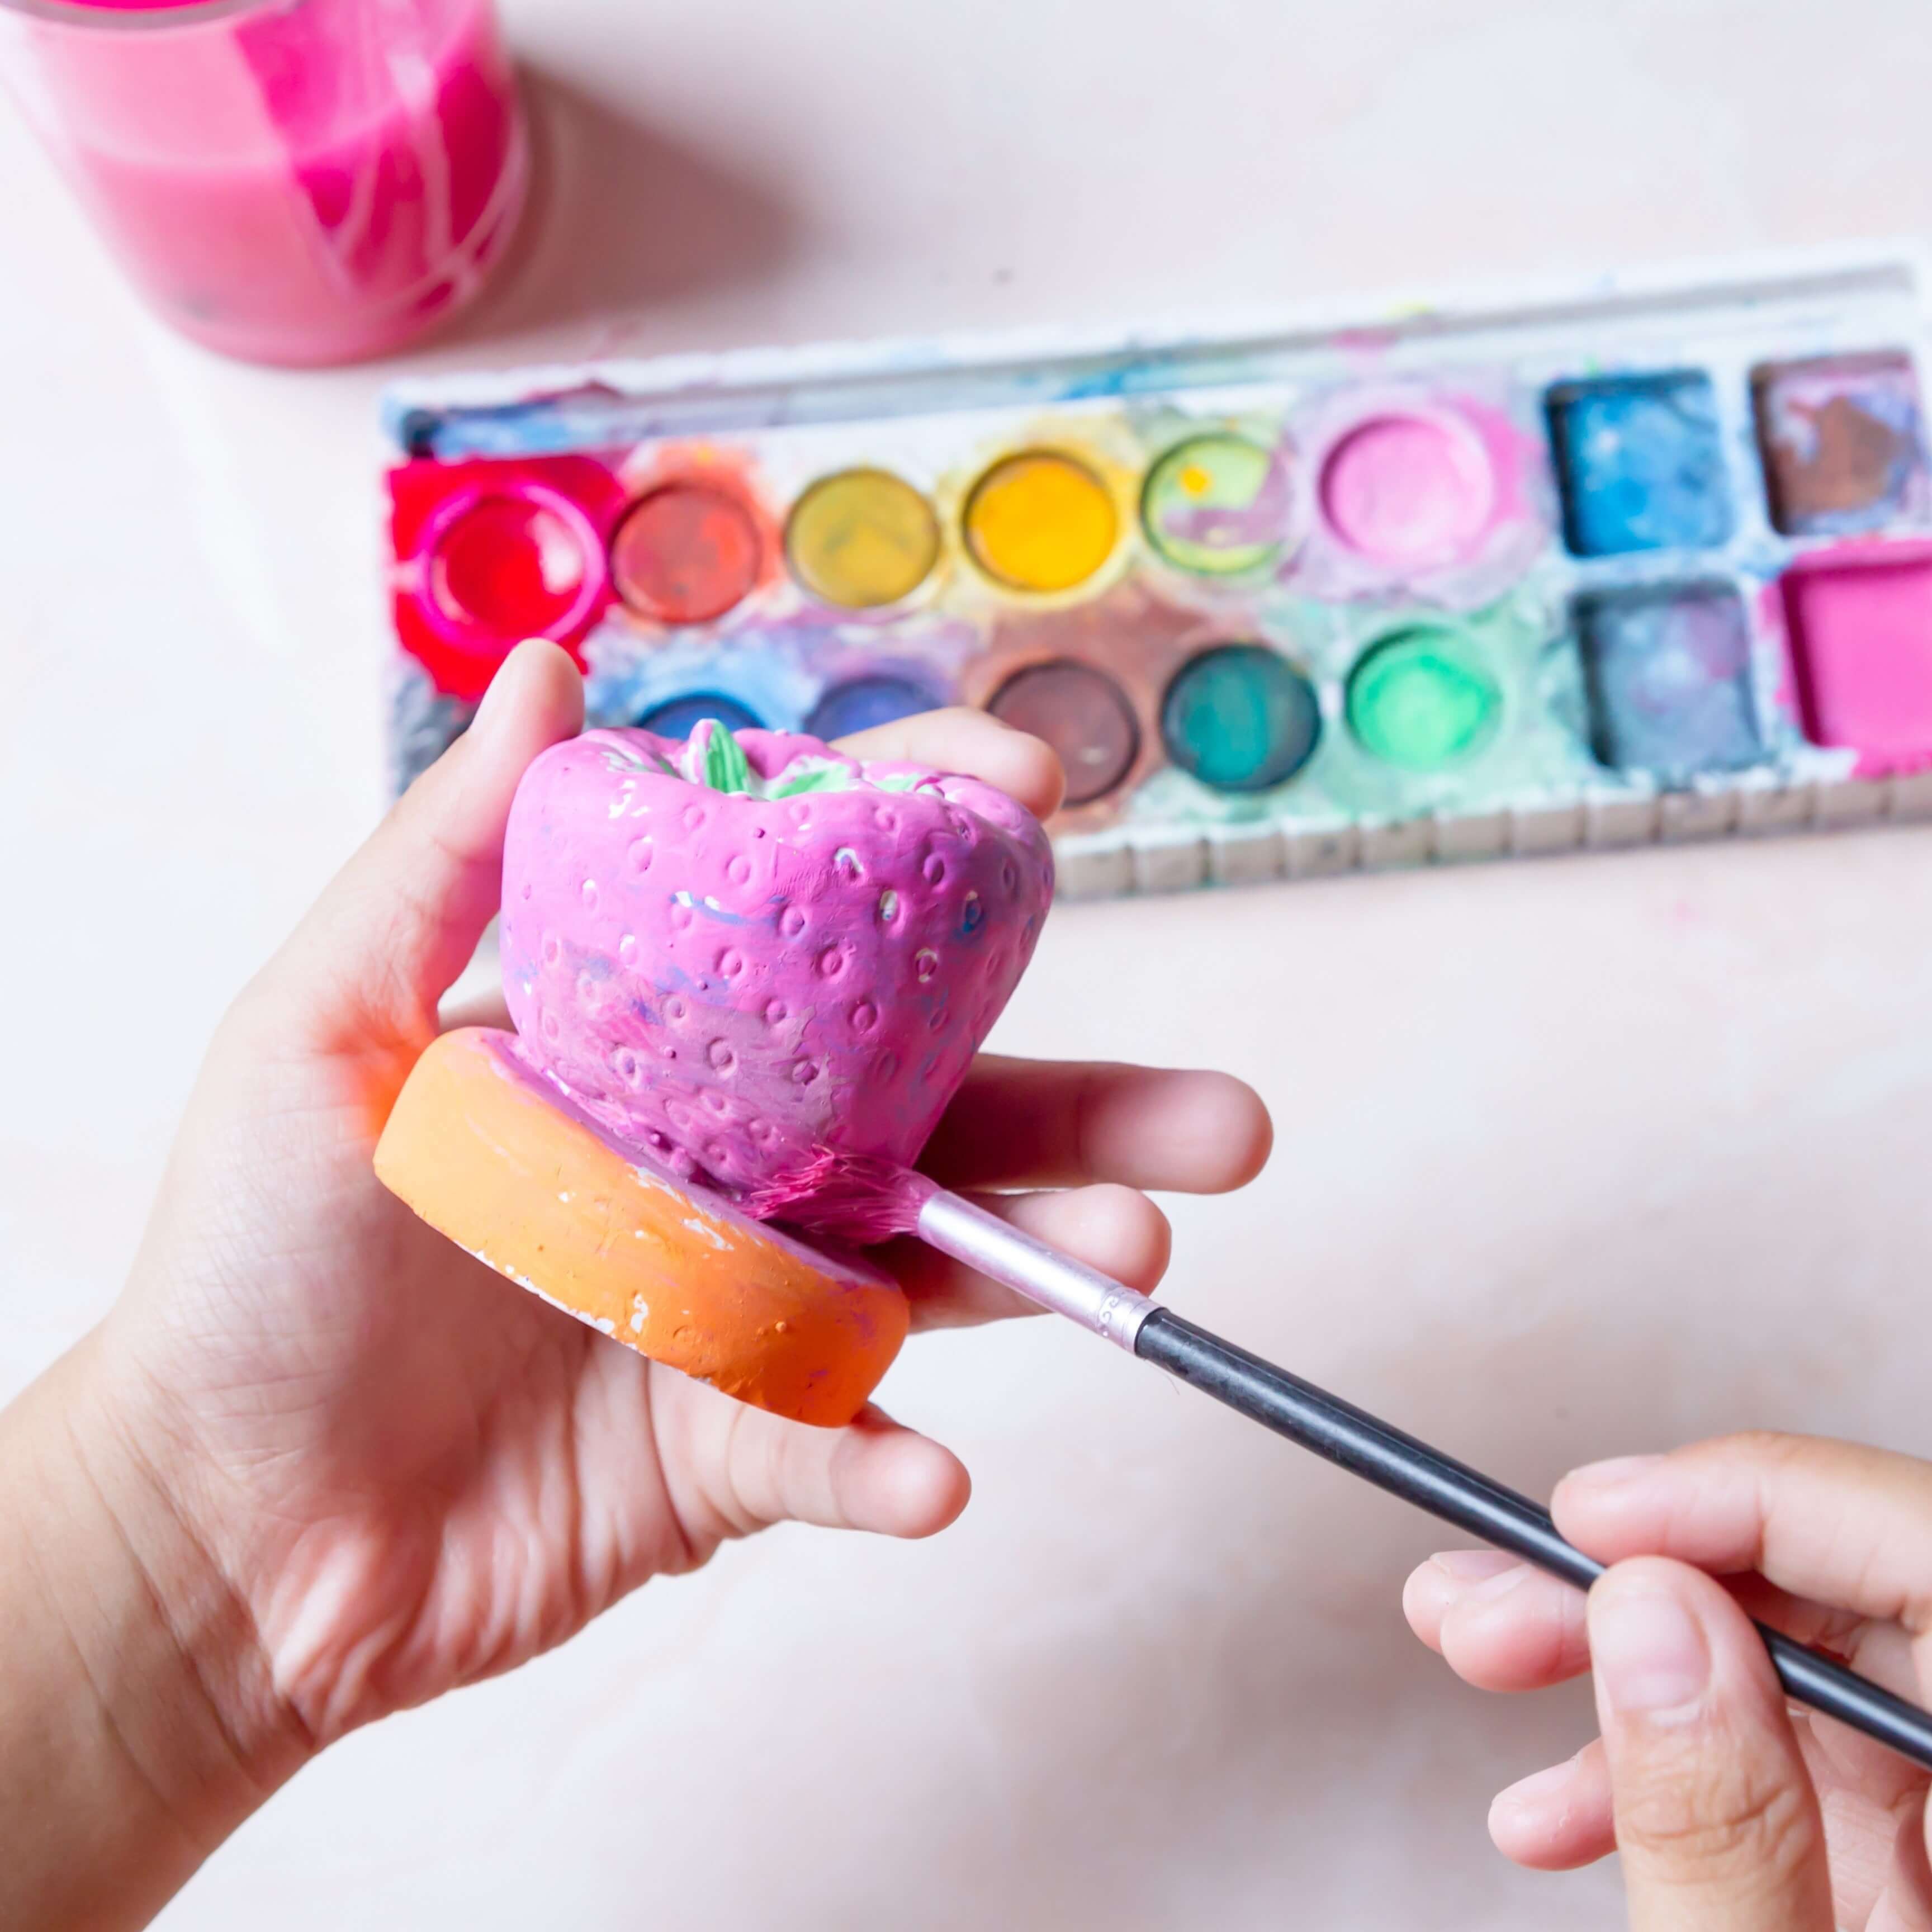 Bright and colourful paints with hands holding a plaster painting object painting it bright pink.